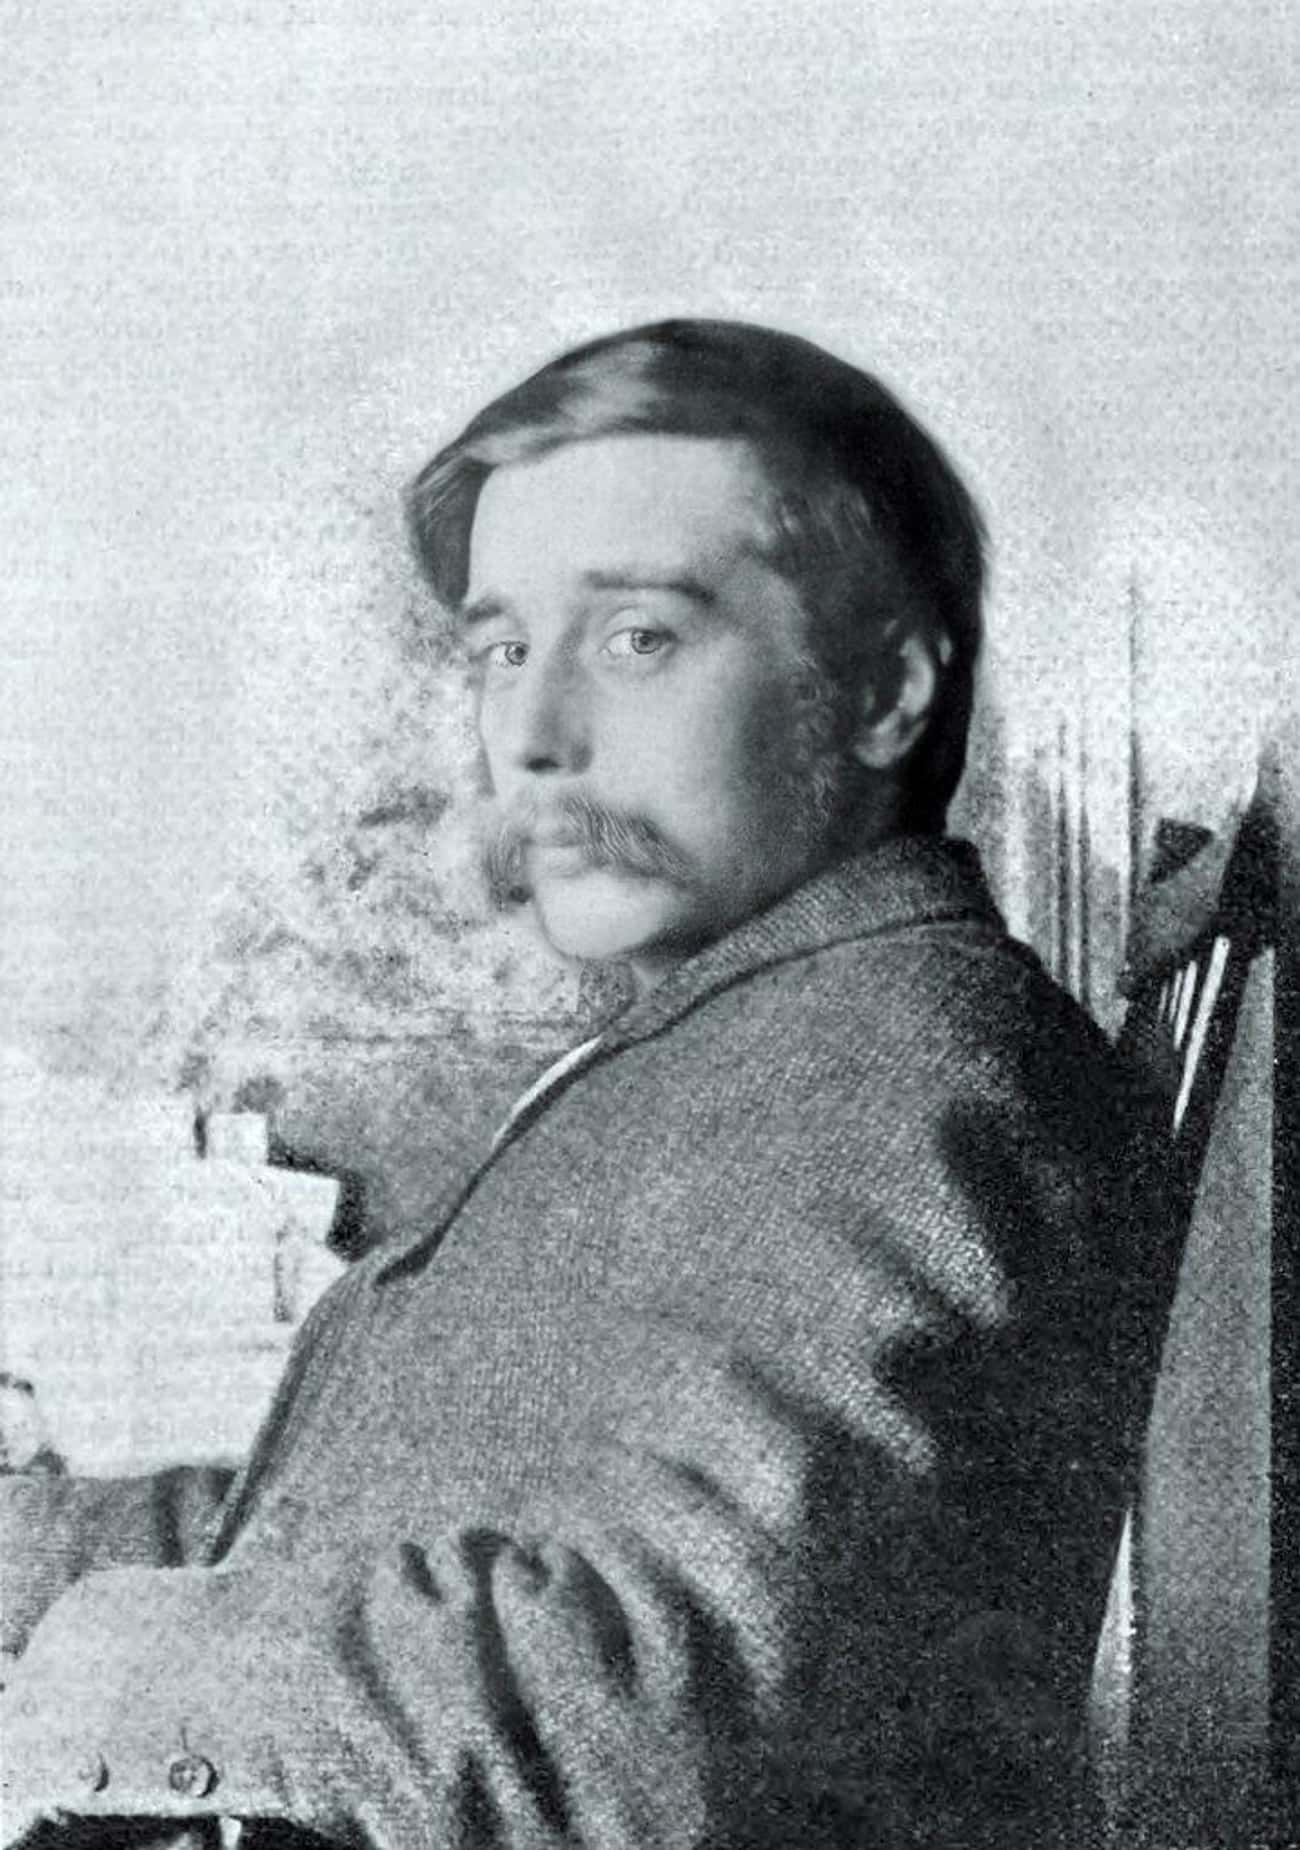 H.G. Wells Came Up with the Atomic Bomb